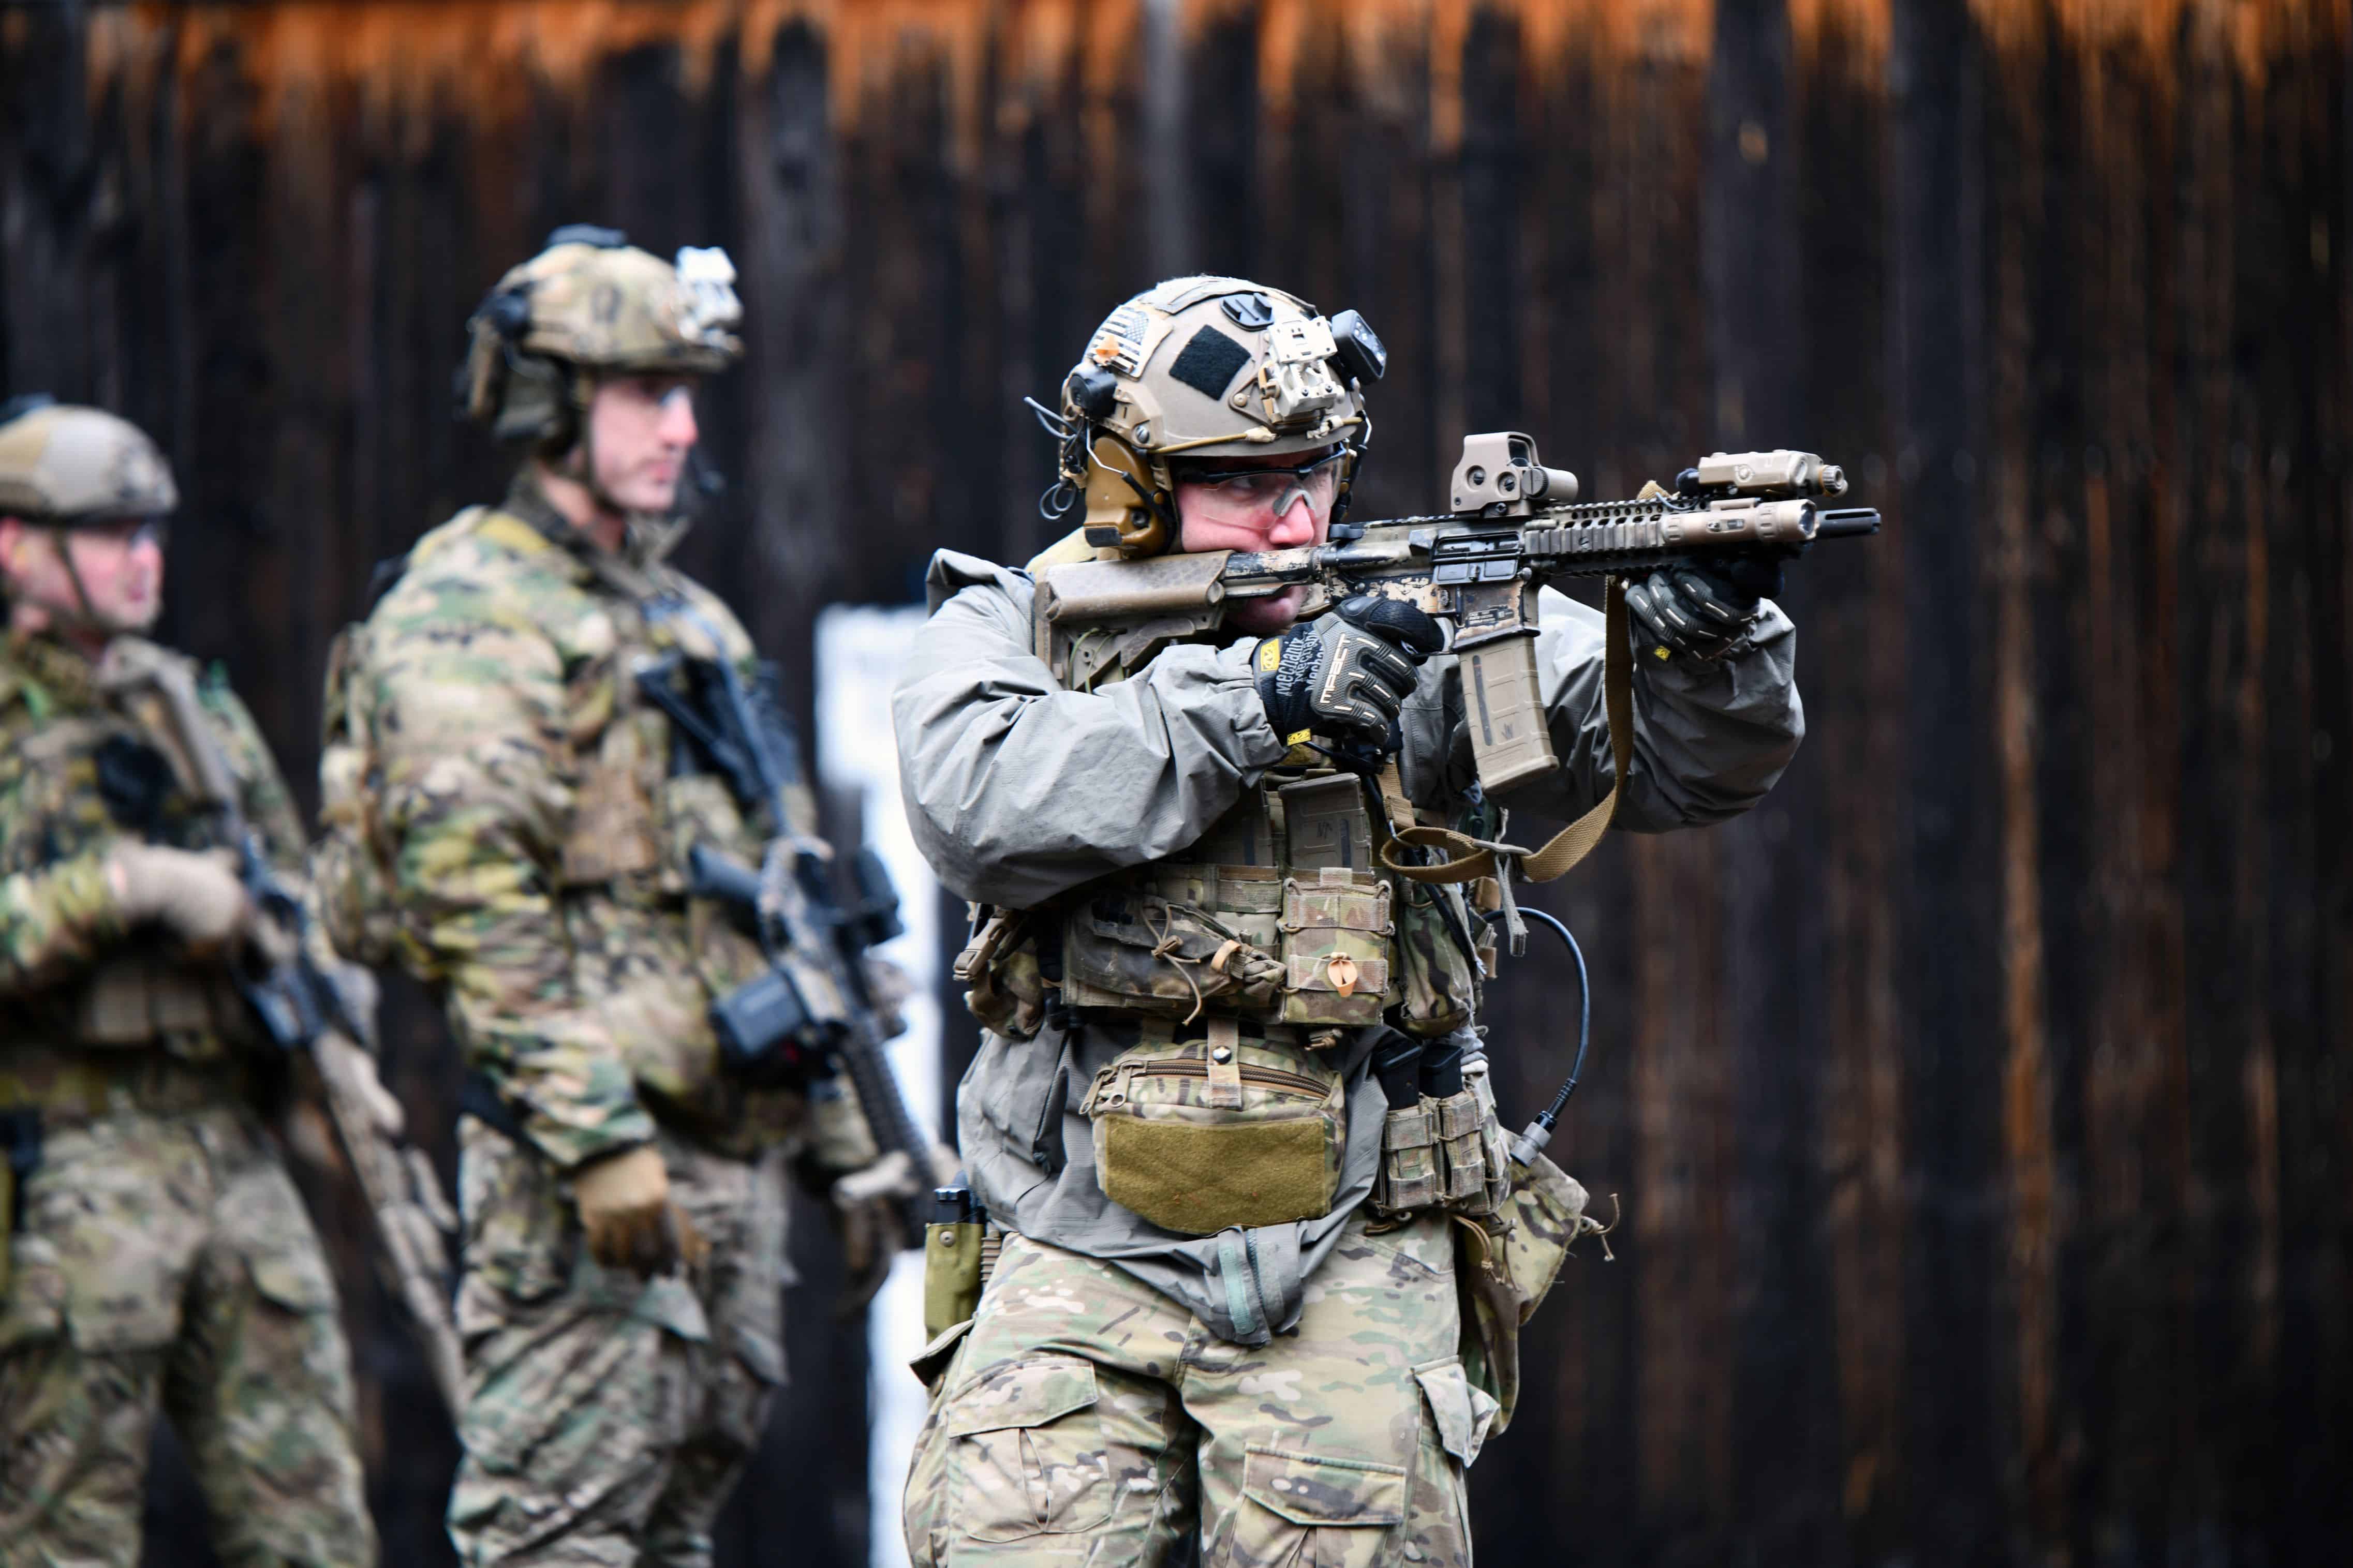 U.S. Special Operations Forces Soldiers assigned to 10th Special Forces Group (Airborne) conduct close range weapons training at a shooting range near Stuttgart, Germany, January 28, 2020. (U.S. Army photo by Jason Johnston)